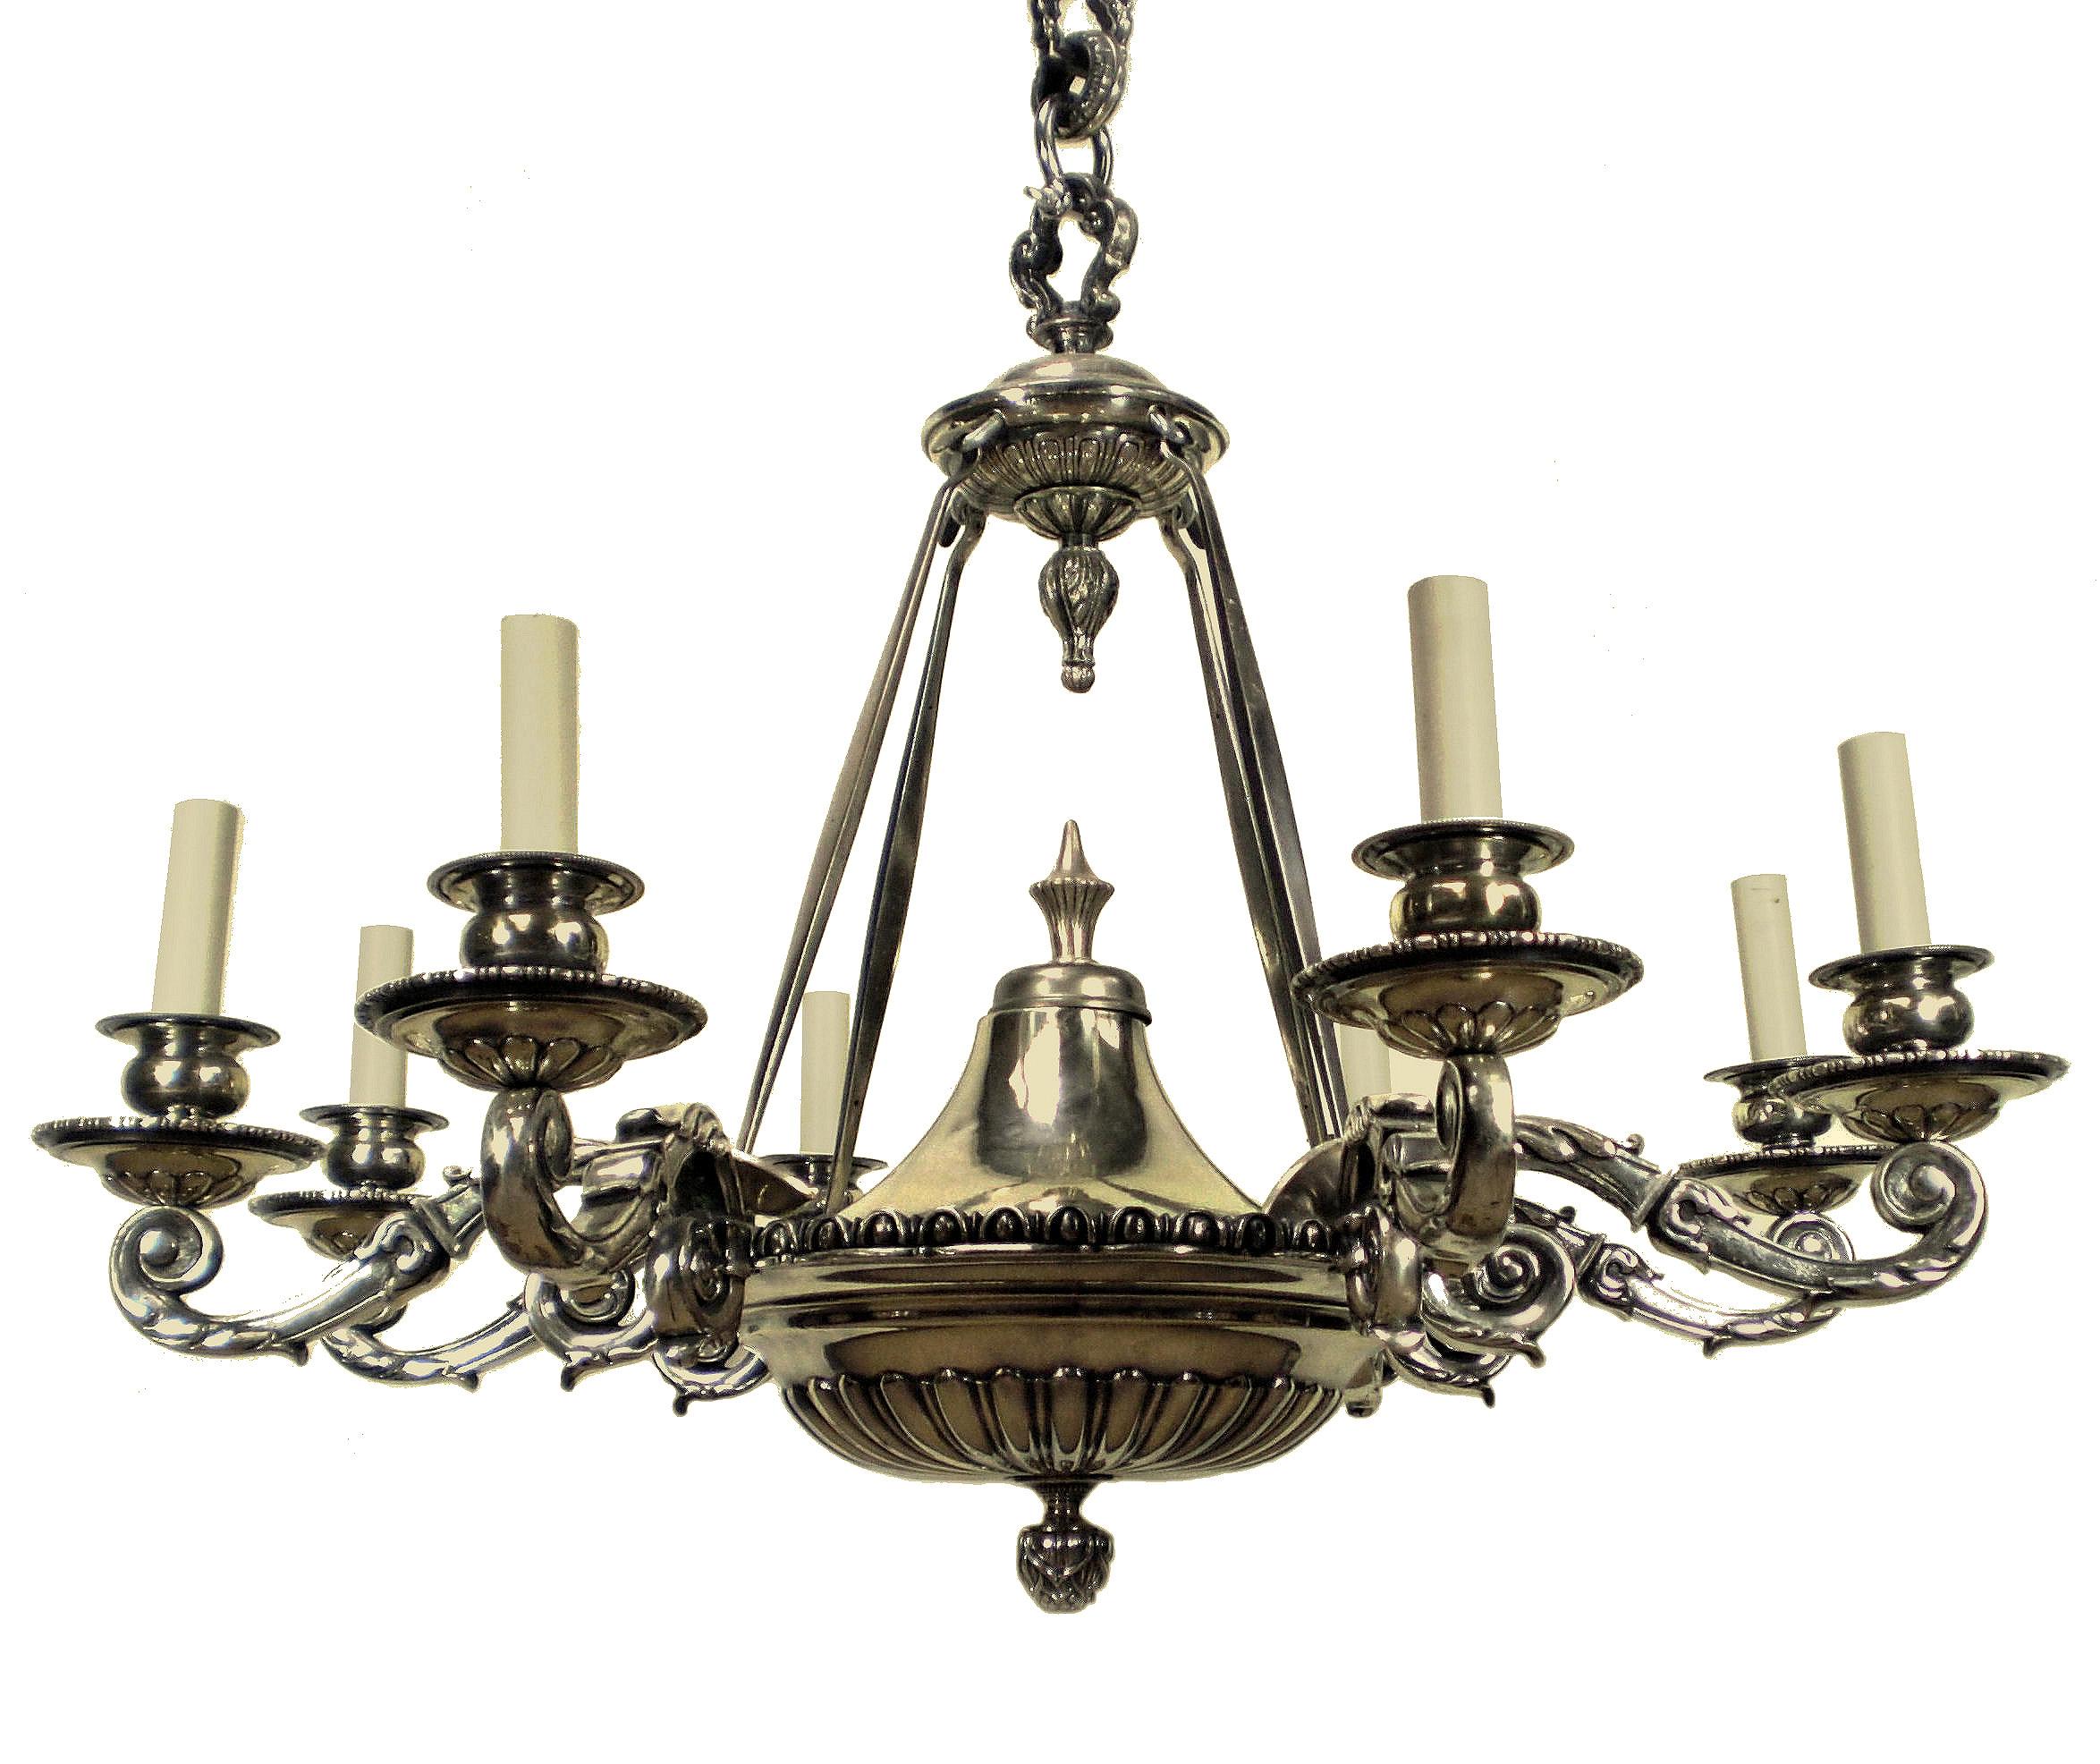 A large and impressive English six branch Charles II style chandelier in silver plated bronze.